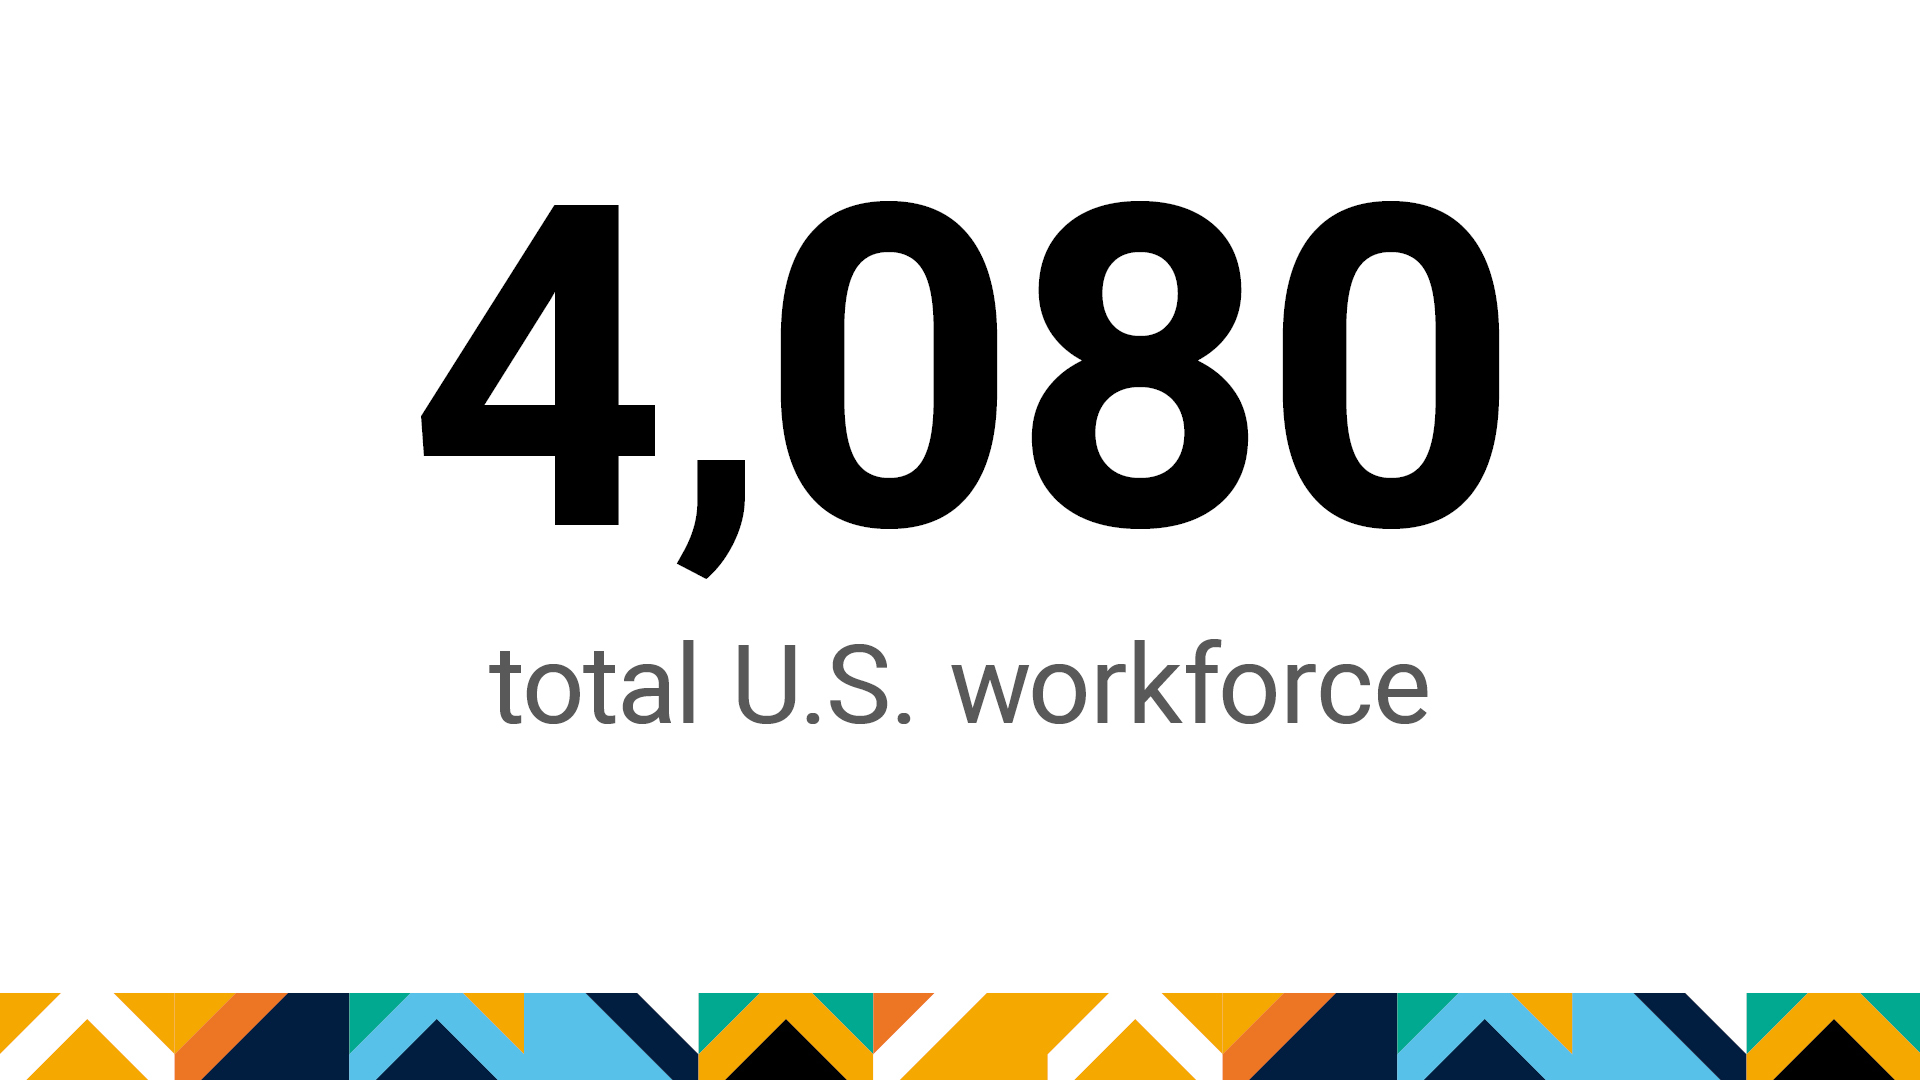 The firm’s U.S. workforce totaled 4,080 as of FY22.